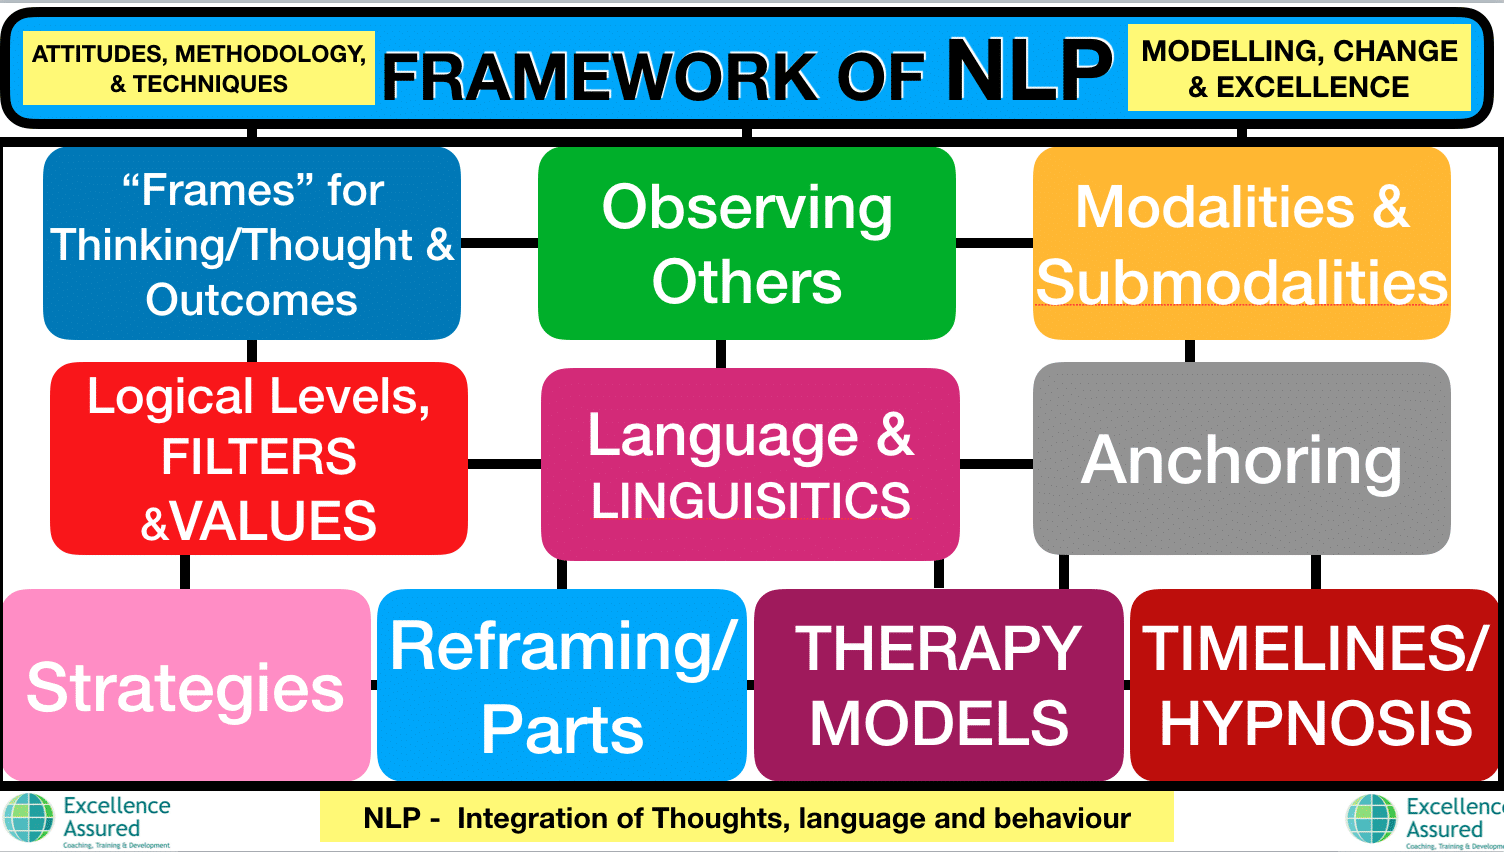 nlp in education research paper